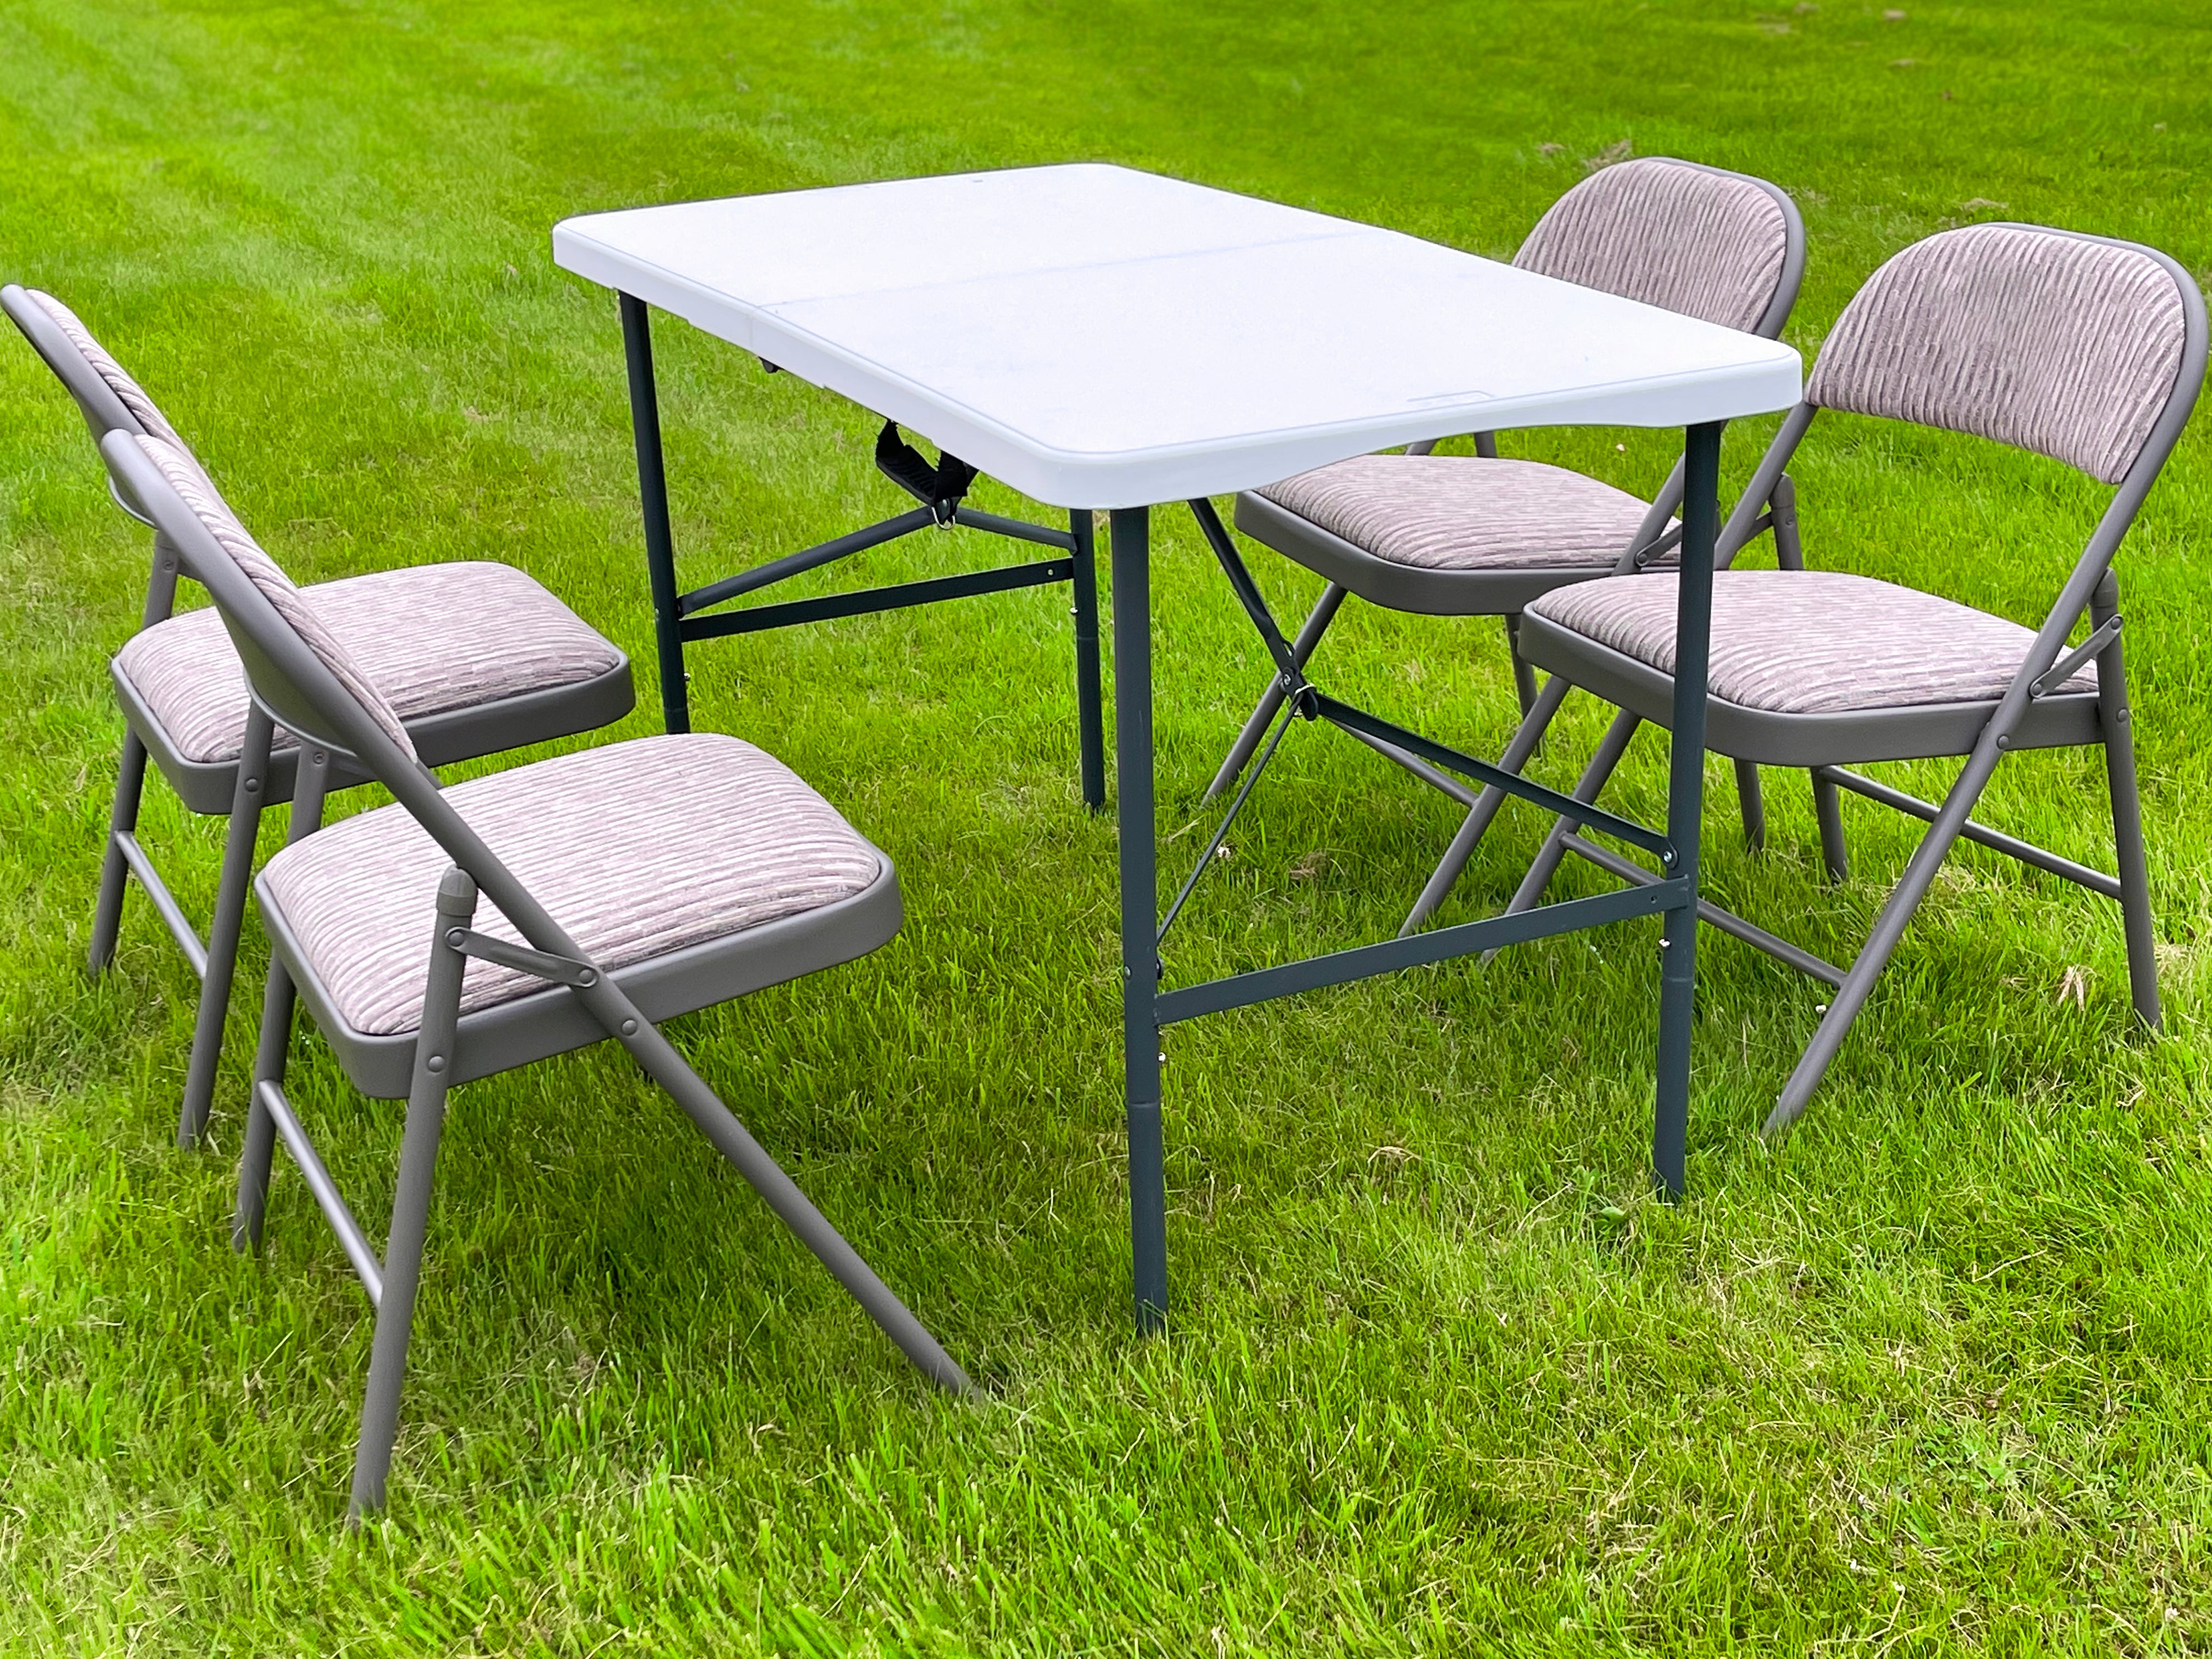 4 Feet Folding Table with 4 Fold Away Chairs